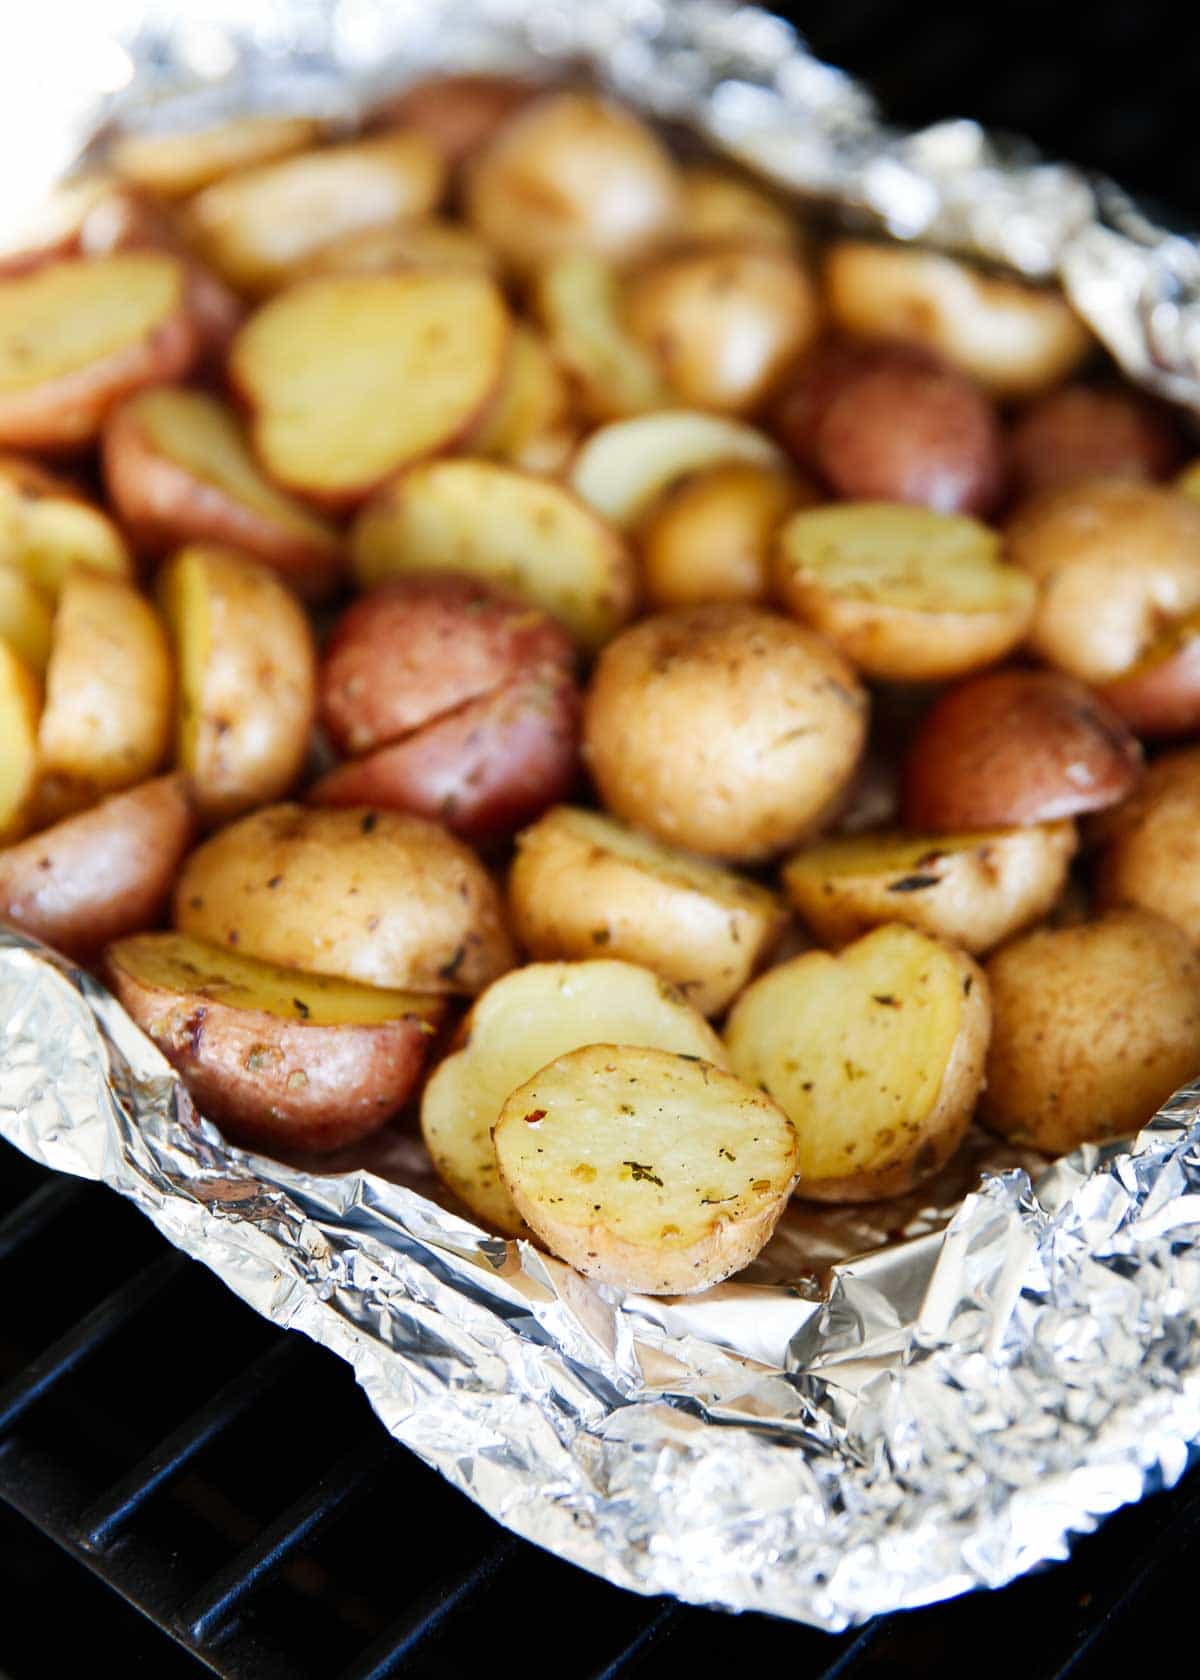 Grilled potatoes in an open foil pack on grill.